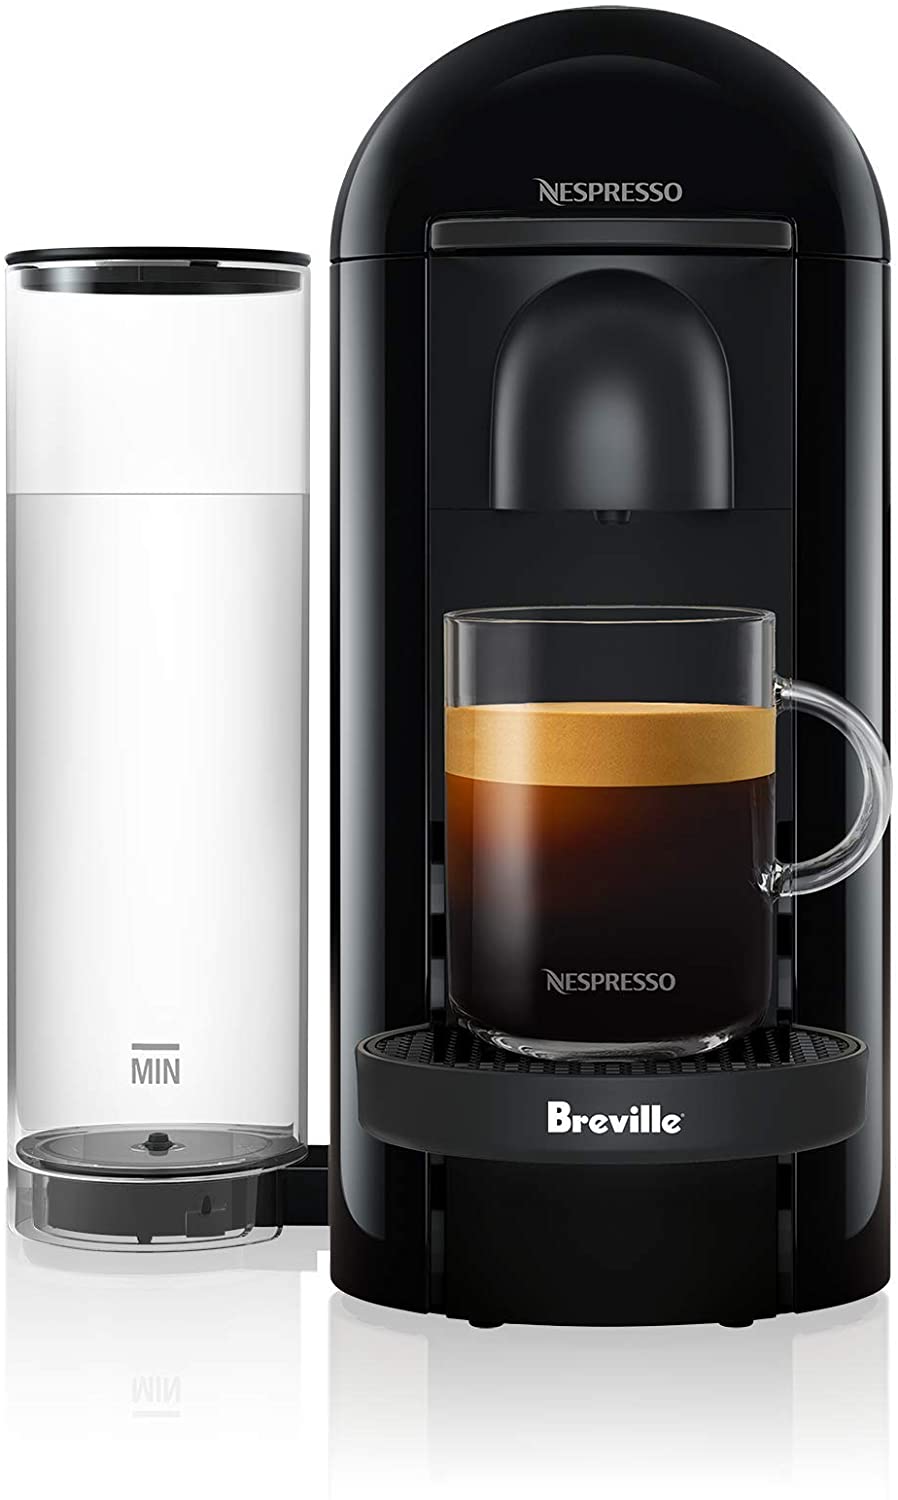 Liquor Play computer games basin Amazon: Nespresso Coffee and Espresso Maker w/30 Coffee Pods for $110 (Reg.  $230) - Kids Activities | Saving Money | Home Management | Motherhood on a  Dime